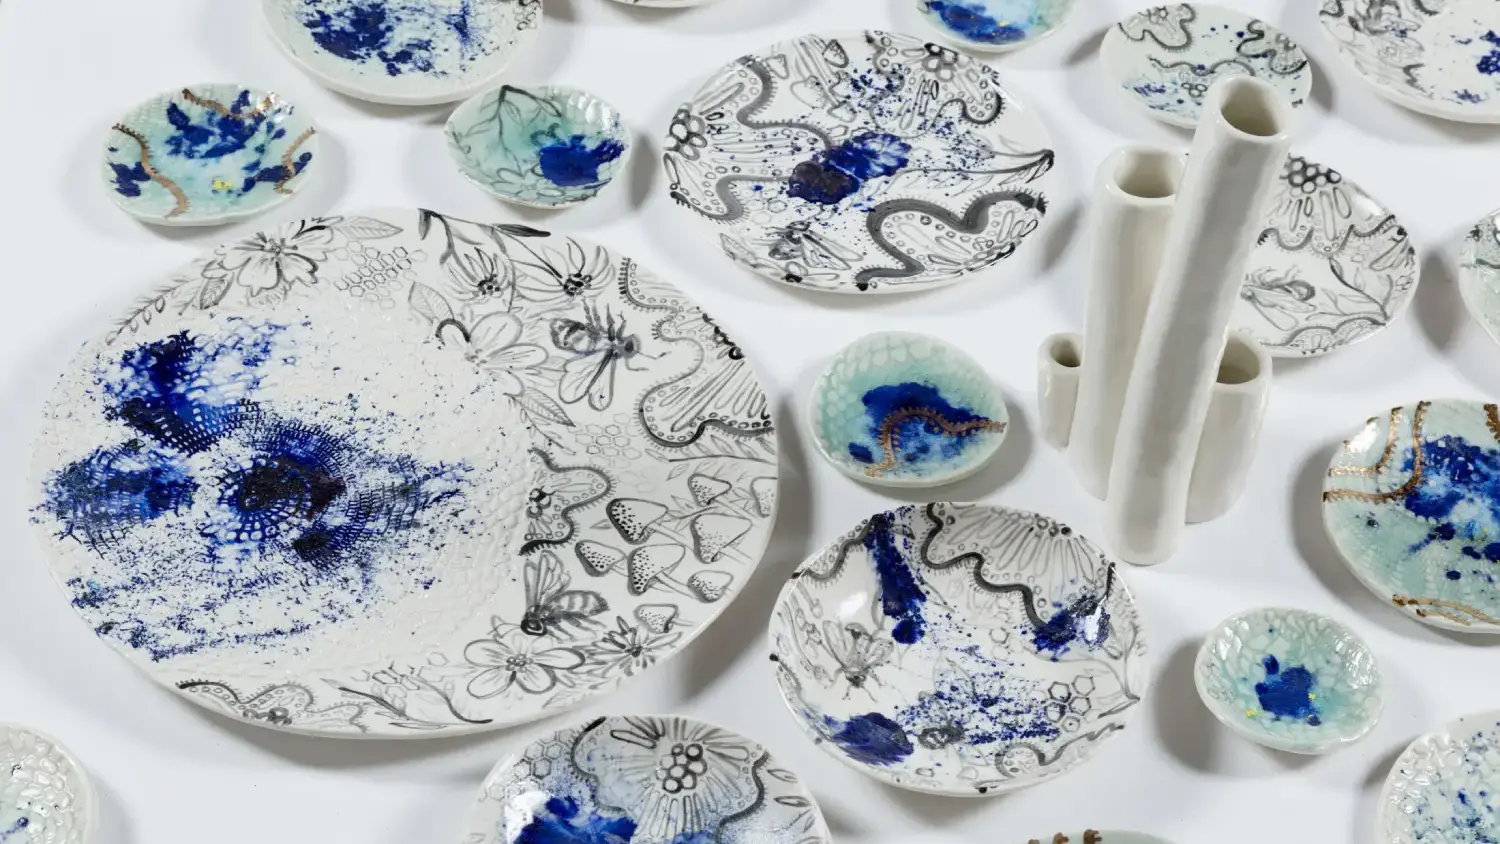 Pottery in blues and whites.